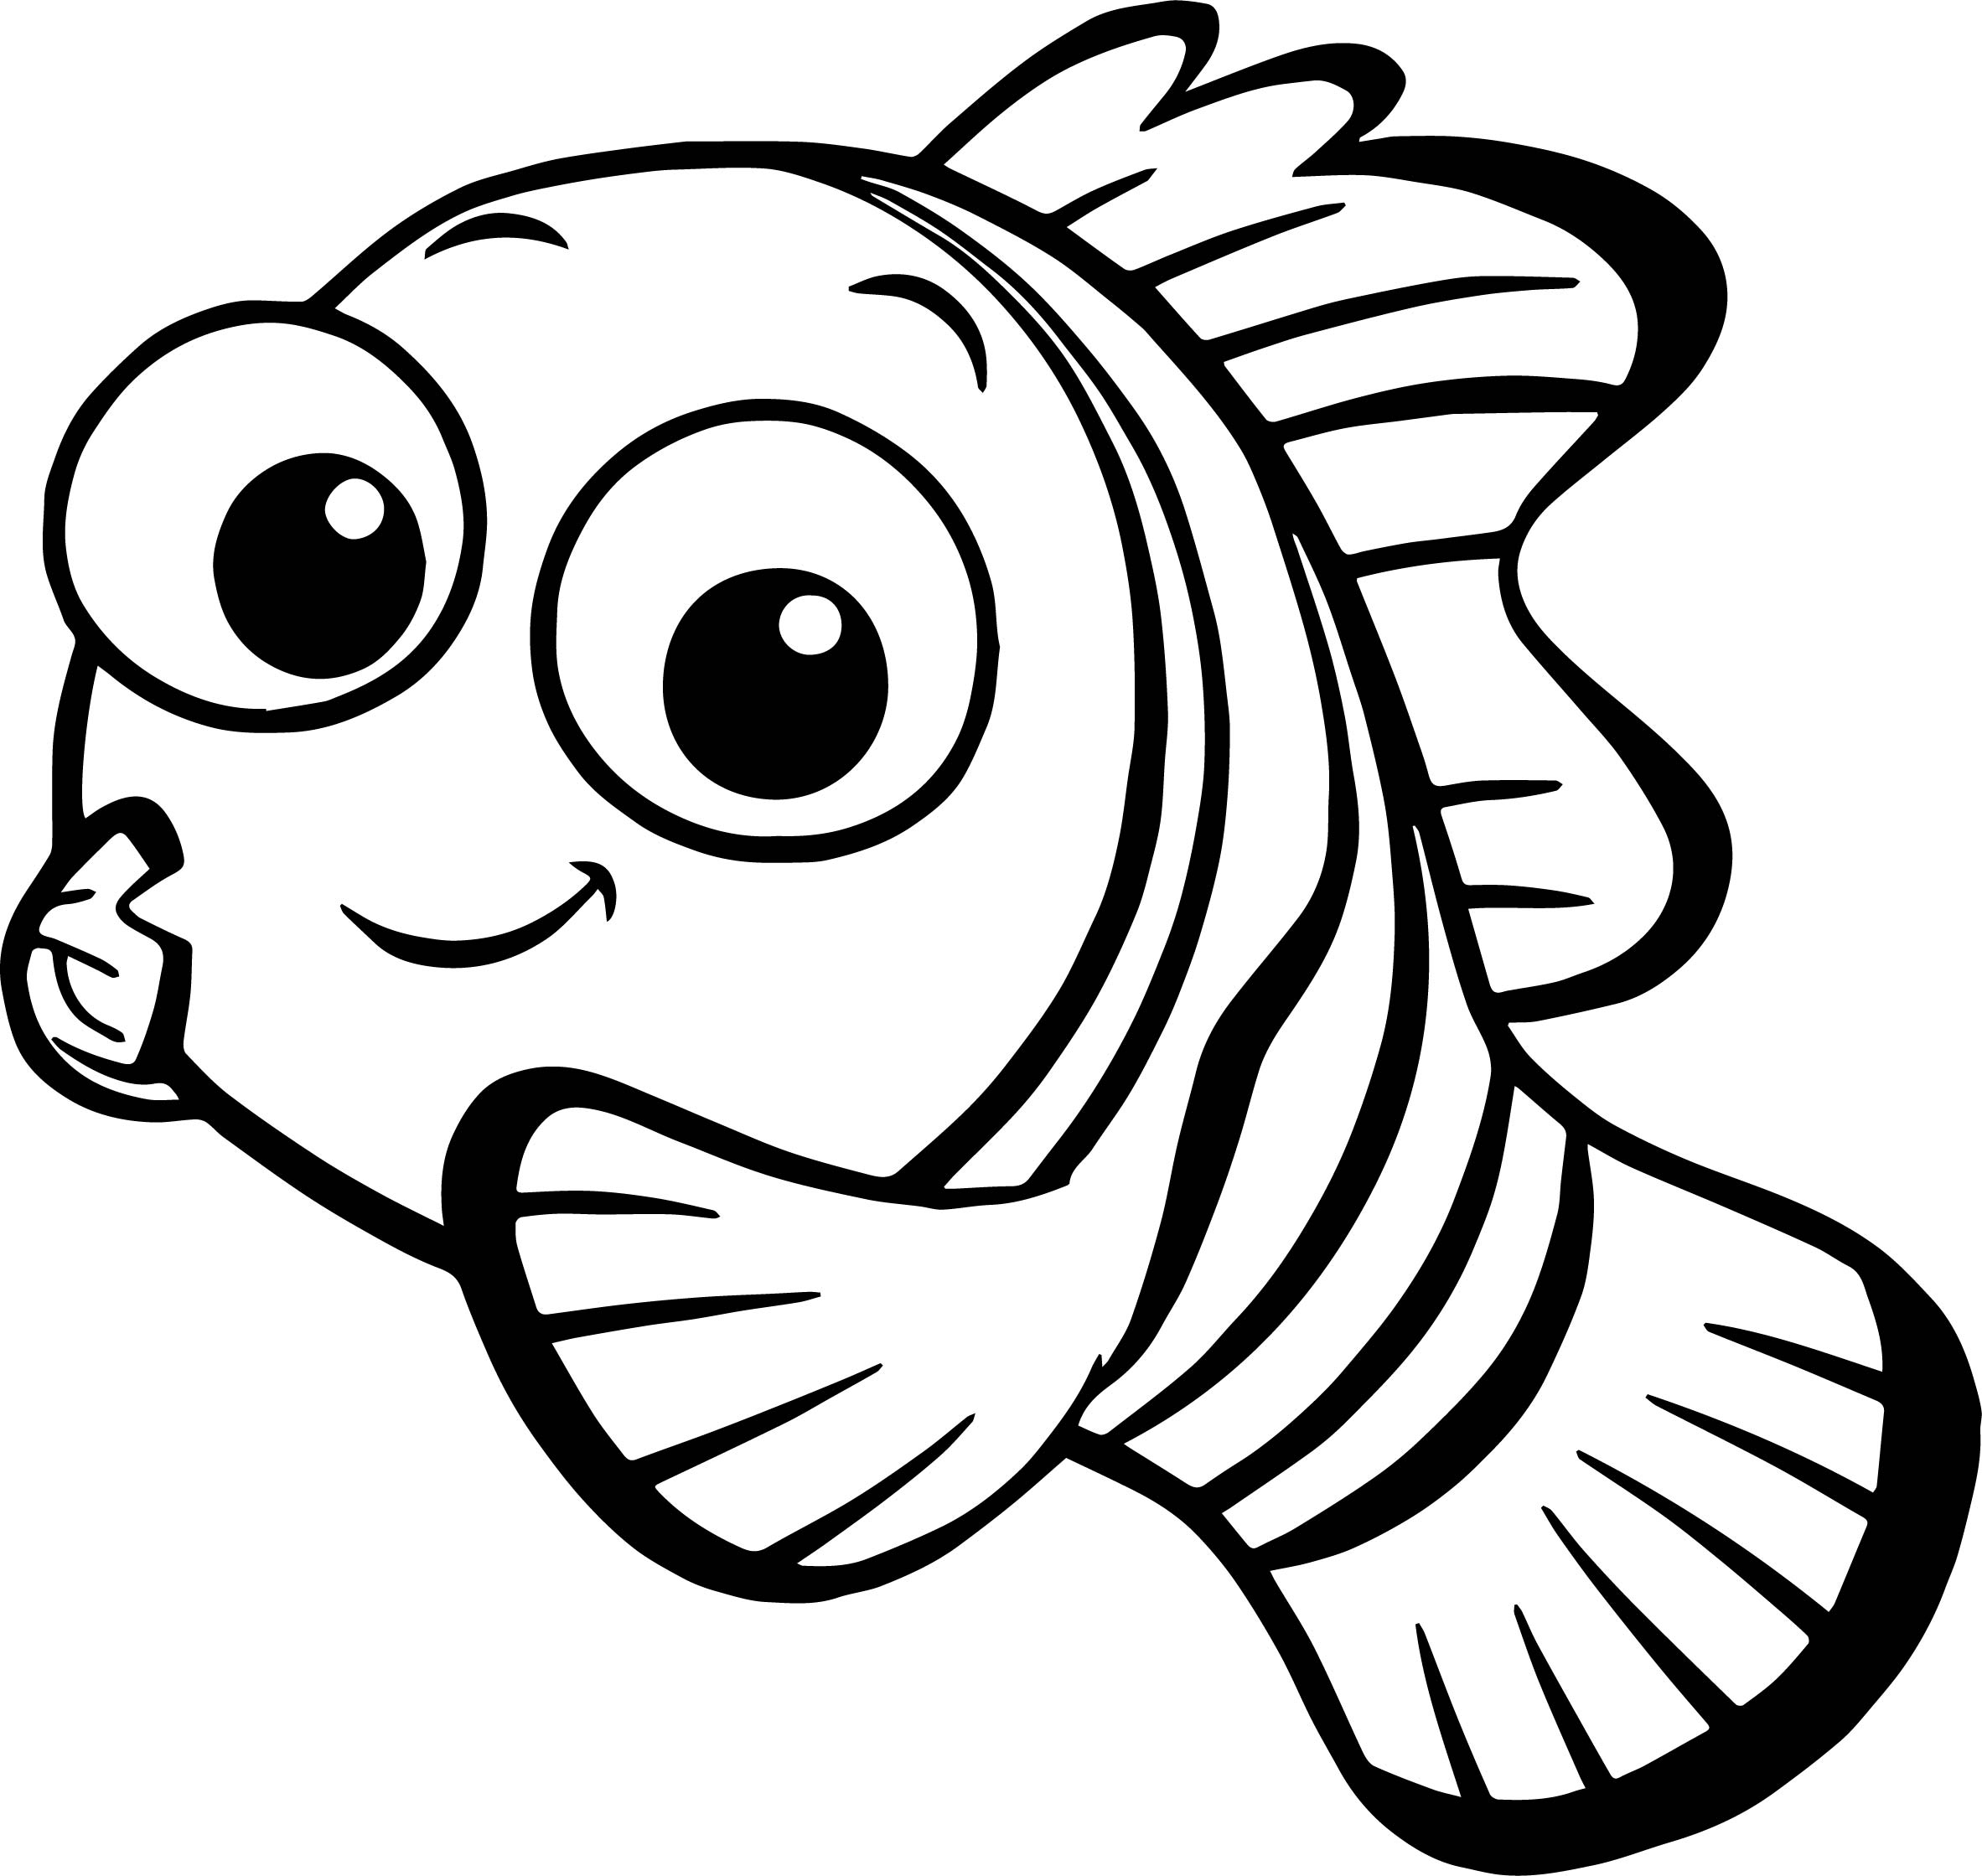 Finding Nemo Characters Coloring Pages Coloring Ideas Finding Nemo Coloring Pages Ideas For Kids